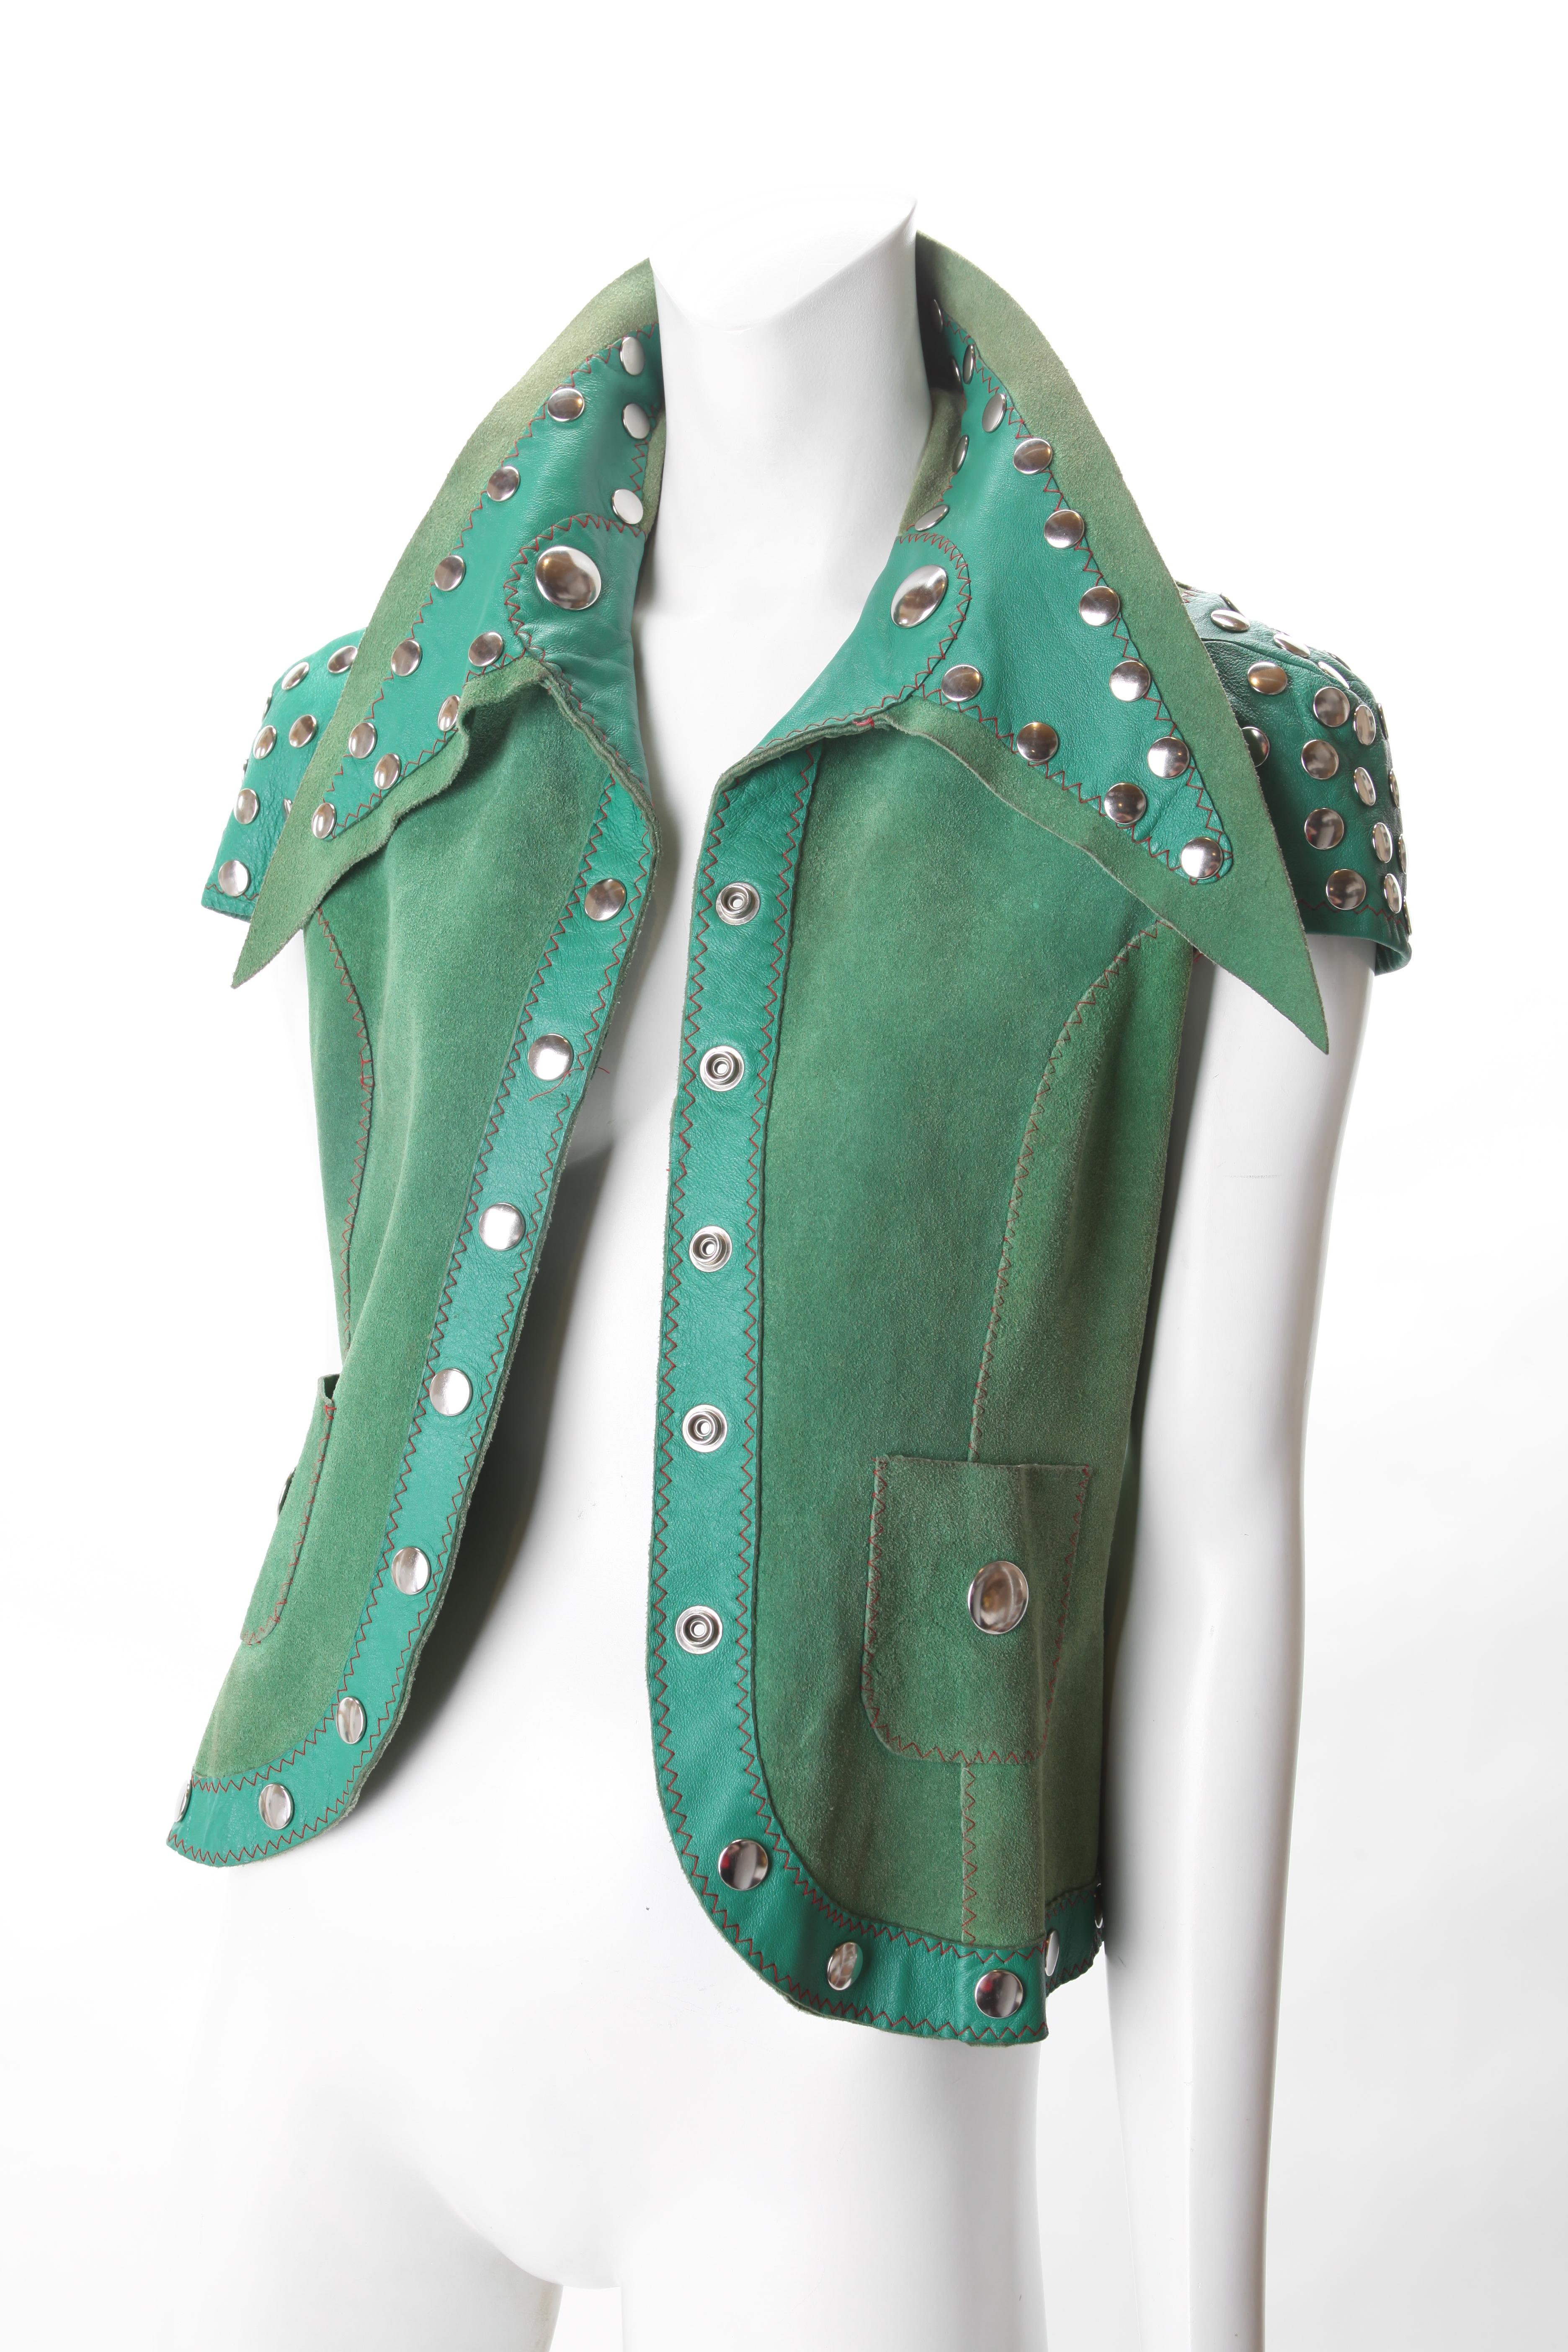 Stephen Burrows Green Suede & Leather Studded Vest, c.1970s.
Stephen Burrows Suede Vest features contrasting leather accent detail at sleeves, exaggerated collar and lapel/hemline. Vest has silver studded buttons with Silver studs adorning the